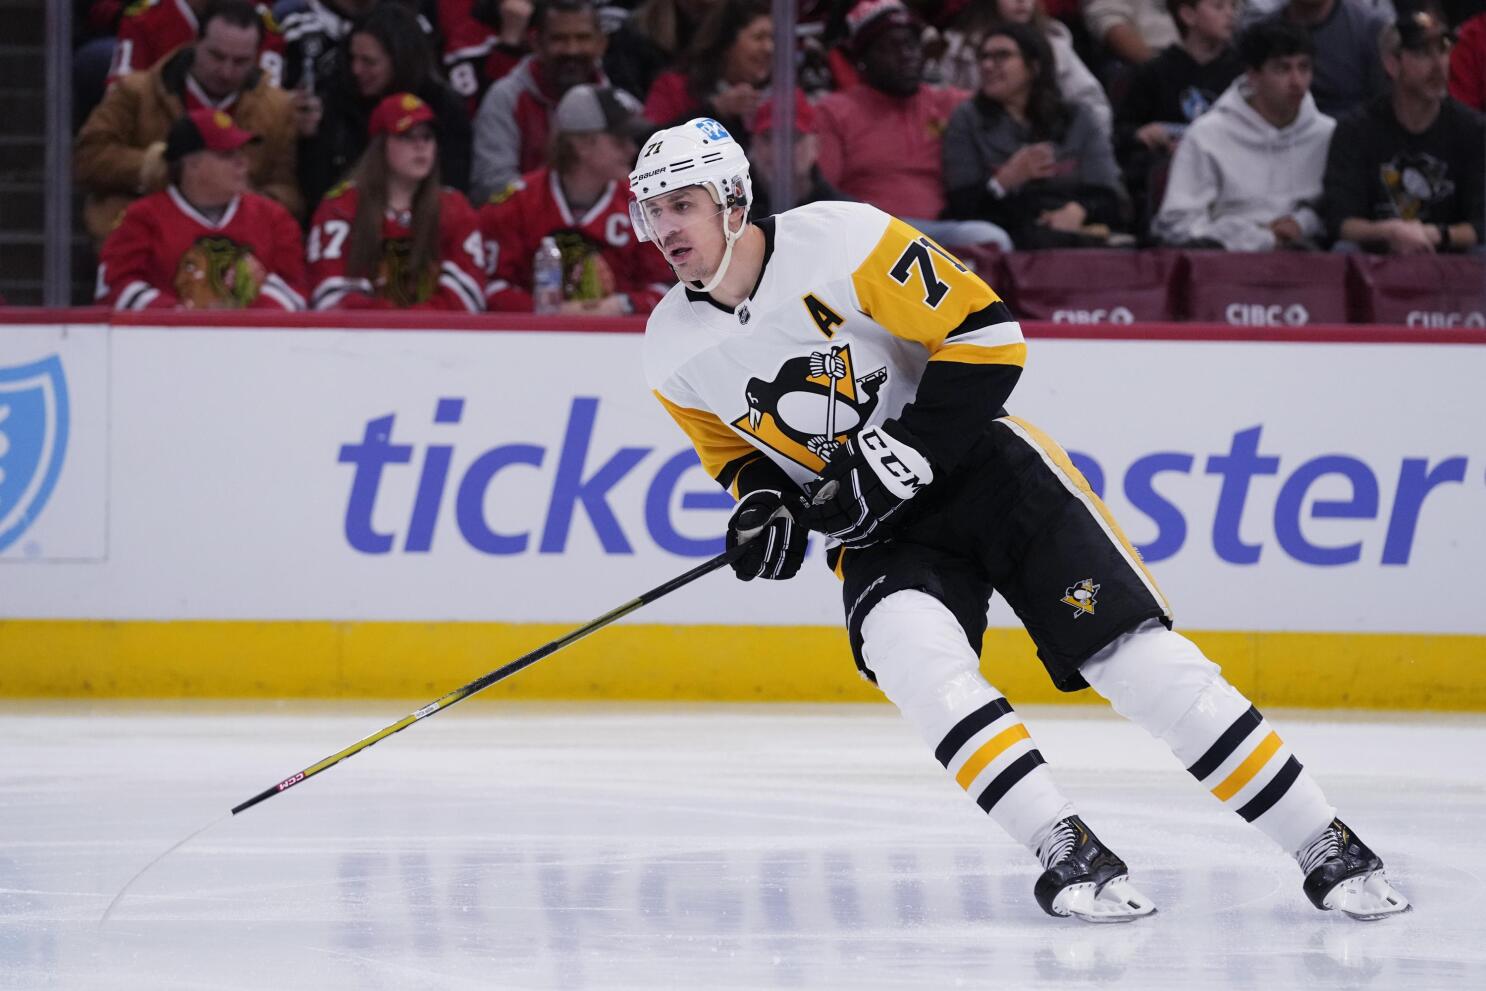 Report: Penguins' Evgeni Malkin to play in Russia during NHL